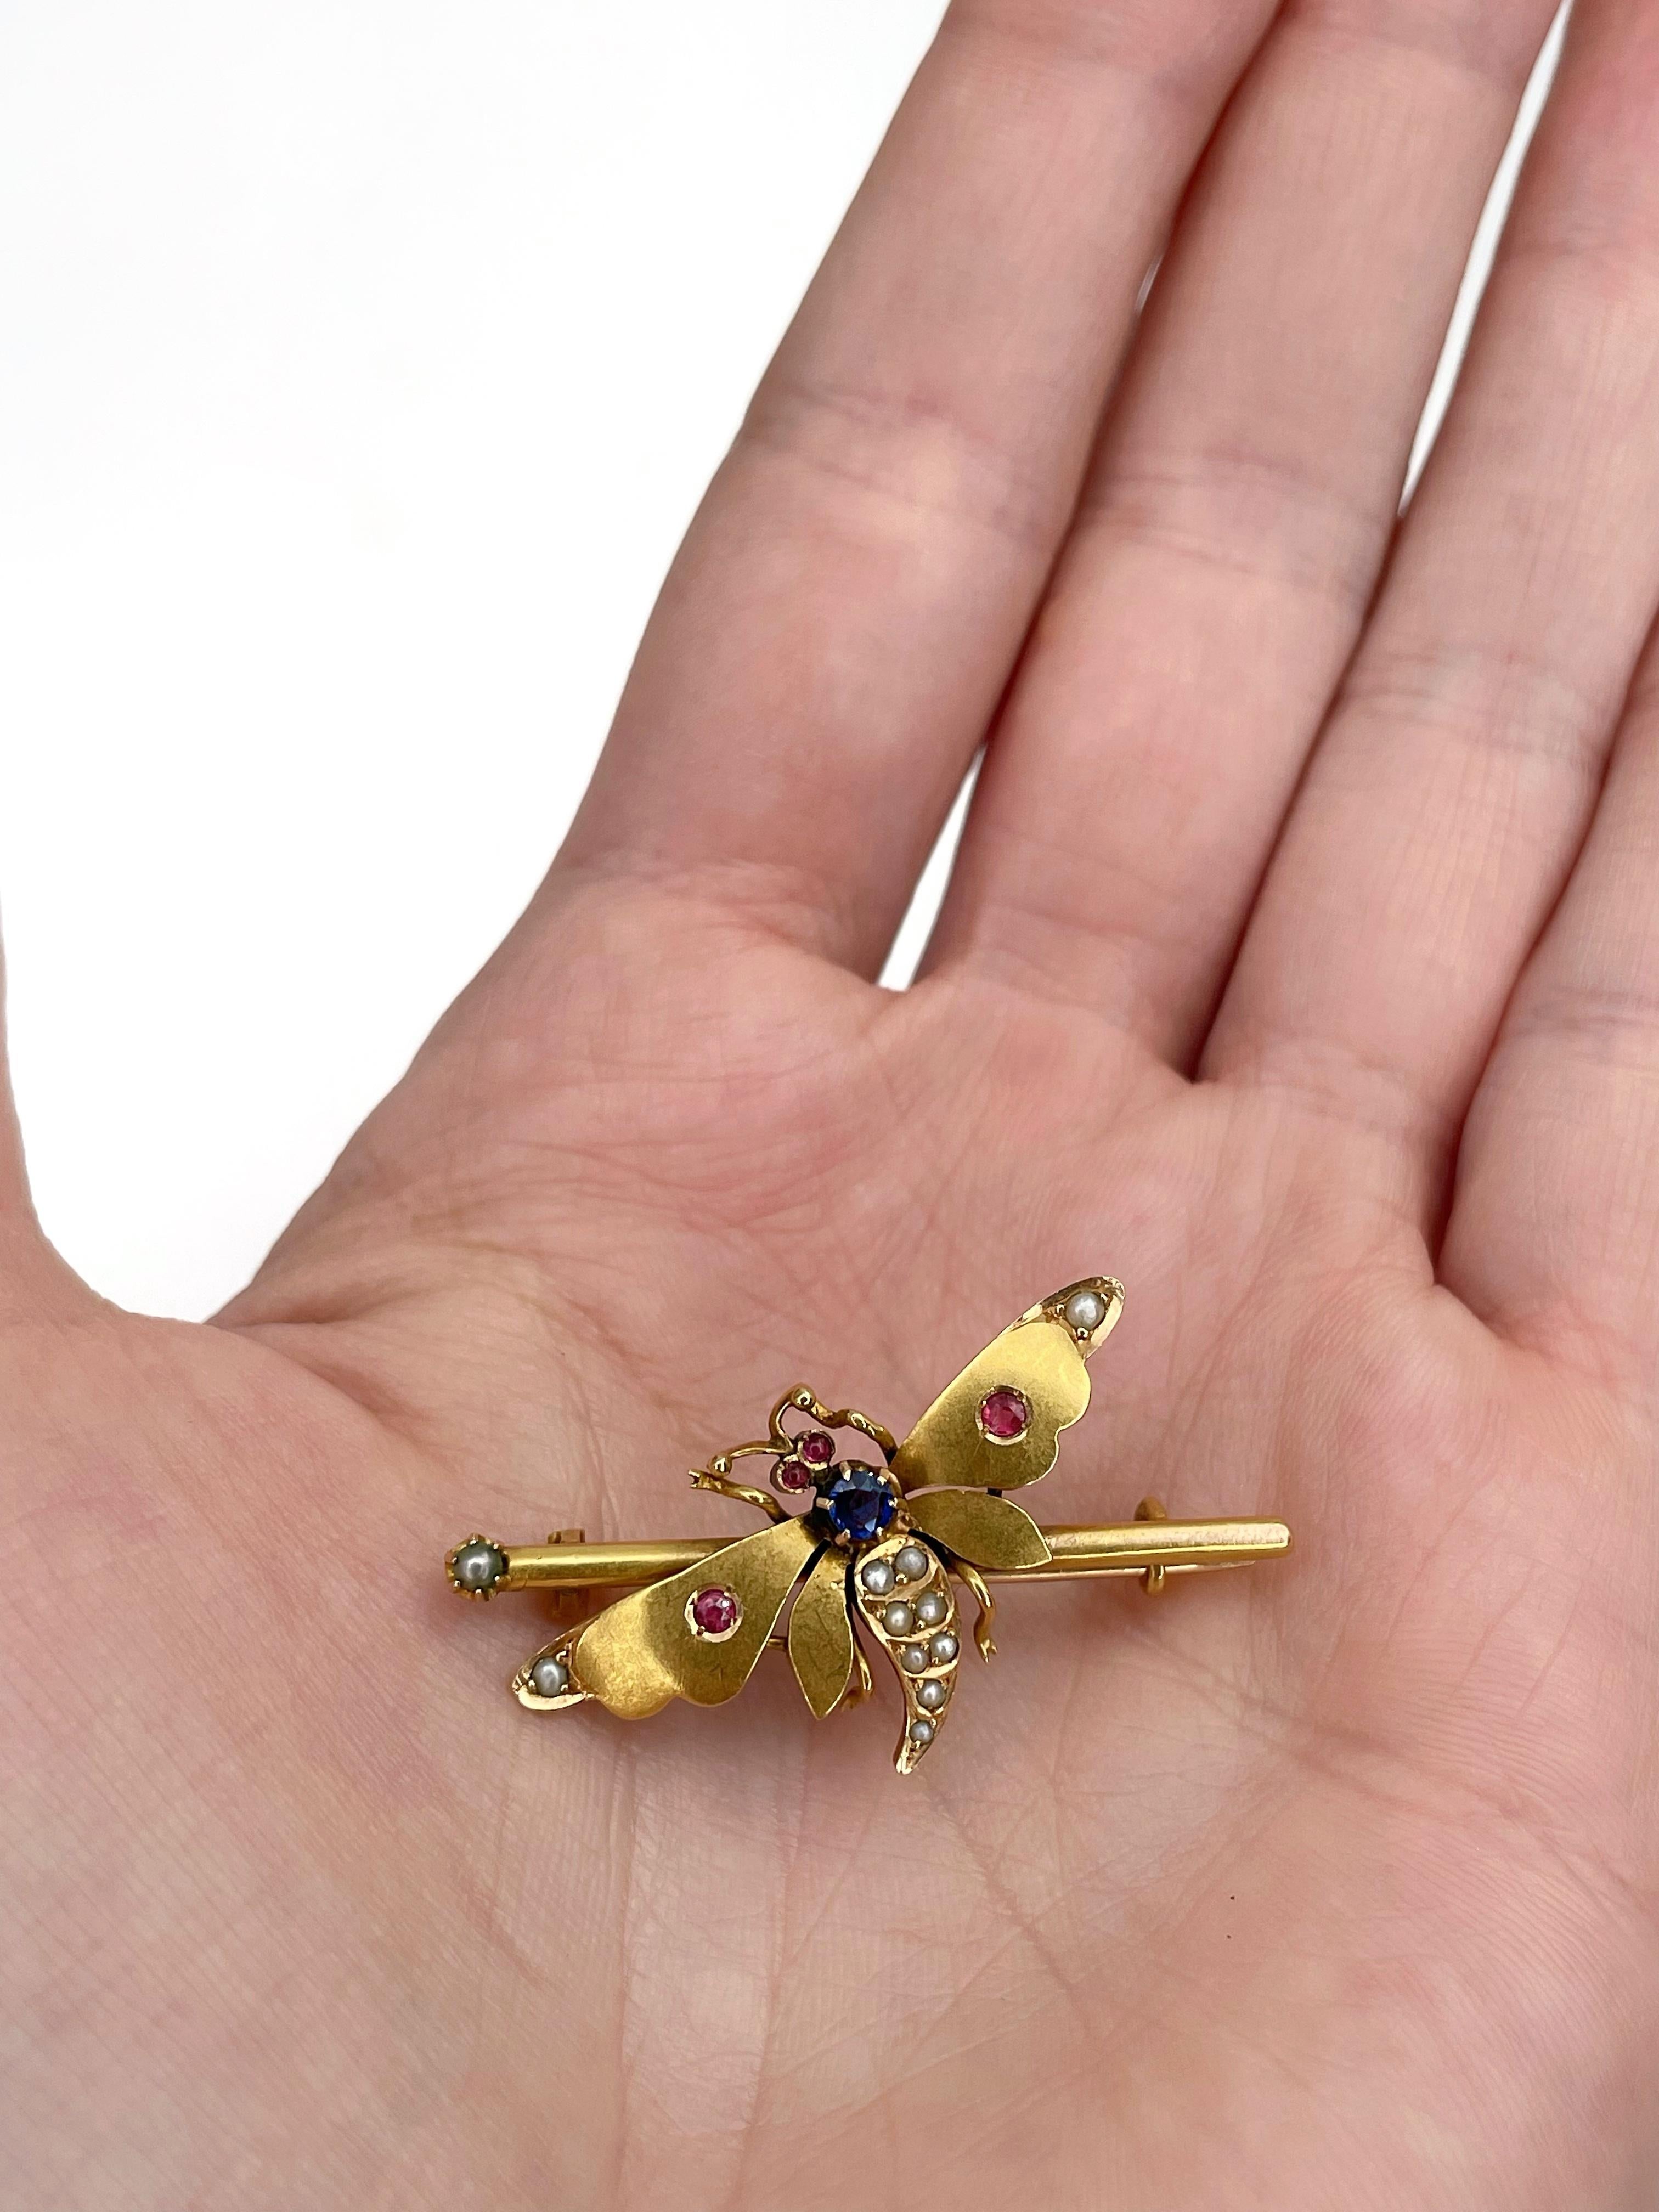 This is a lovely butterfly or dragonfly bar brooch crafted in 18K yellow gold. It features seed pearls and colourful paste.  

Weight: 3.27g
Size: 3.5x1.7cm

———

If you have any questions, please feel free to ask. We describe our items accurately.